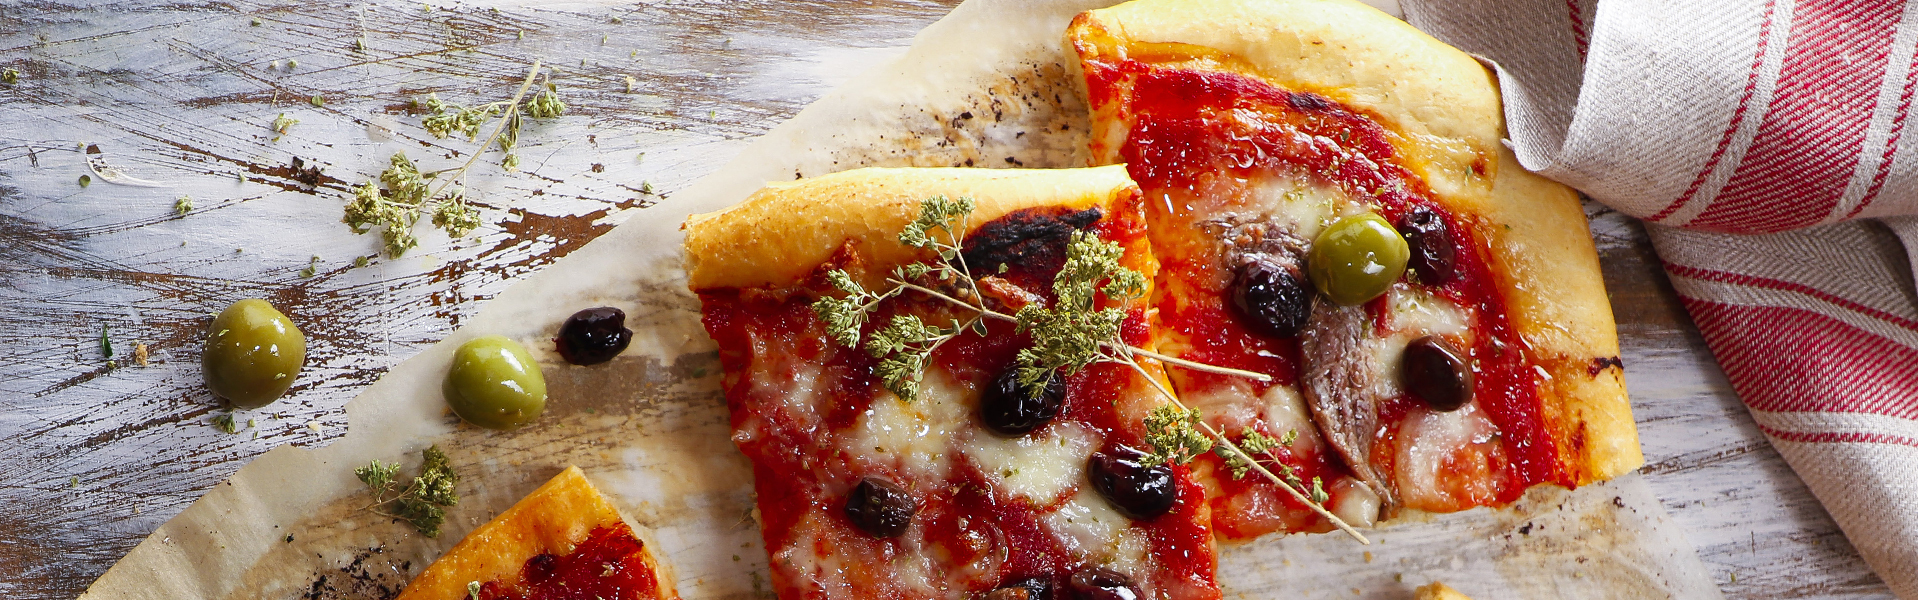 Anchovy, olive and oregano pizza